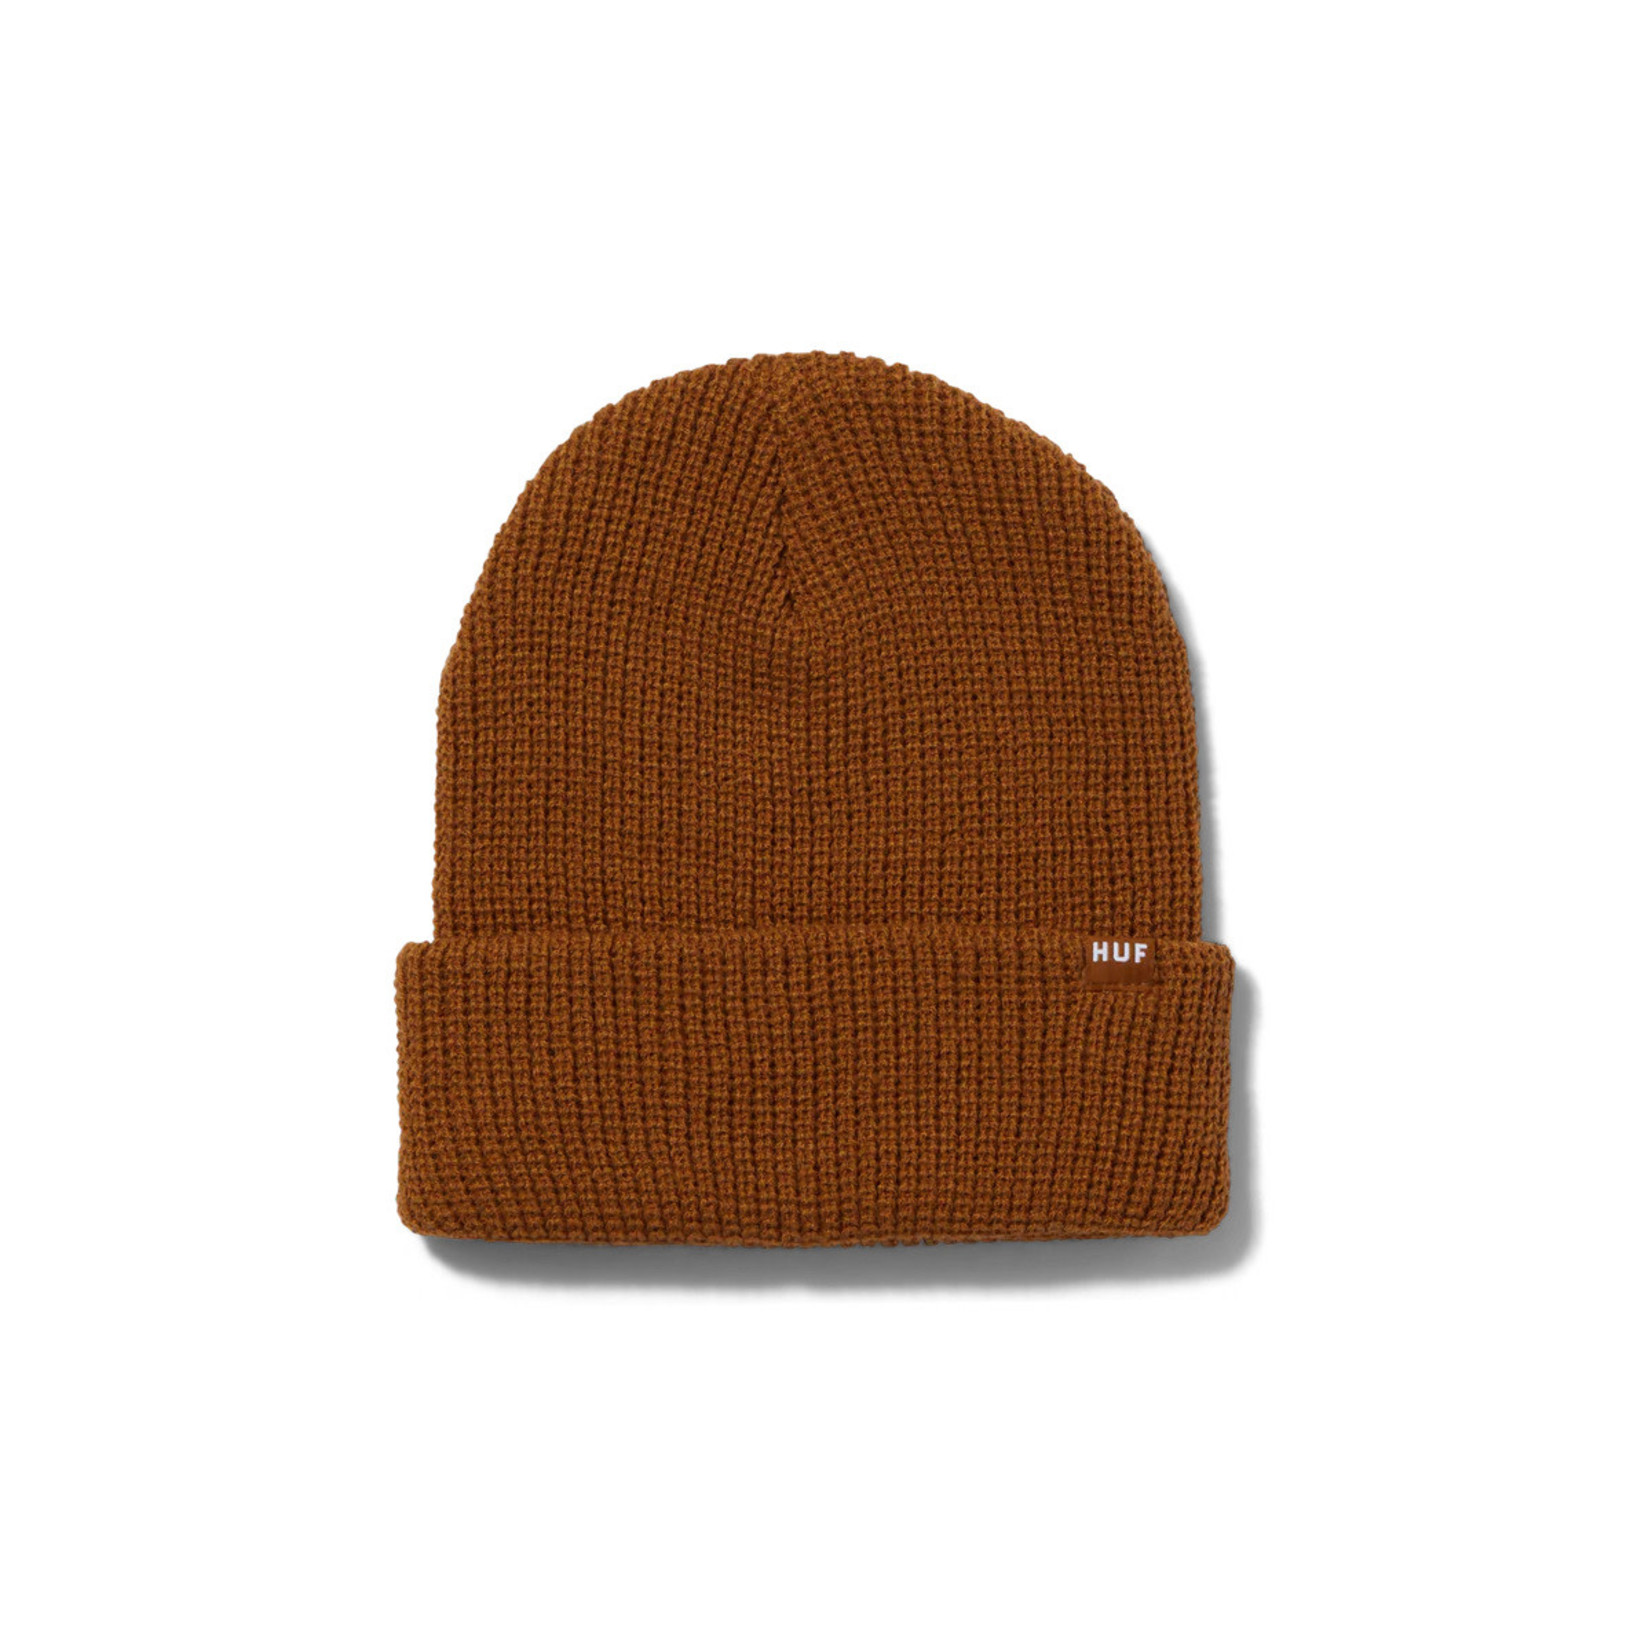 Huf HUF Set Usual Beanie - Rubber -